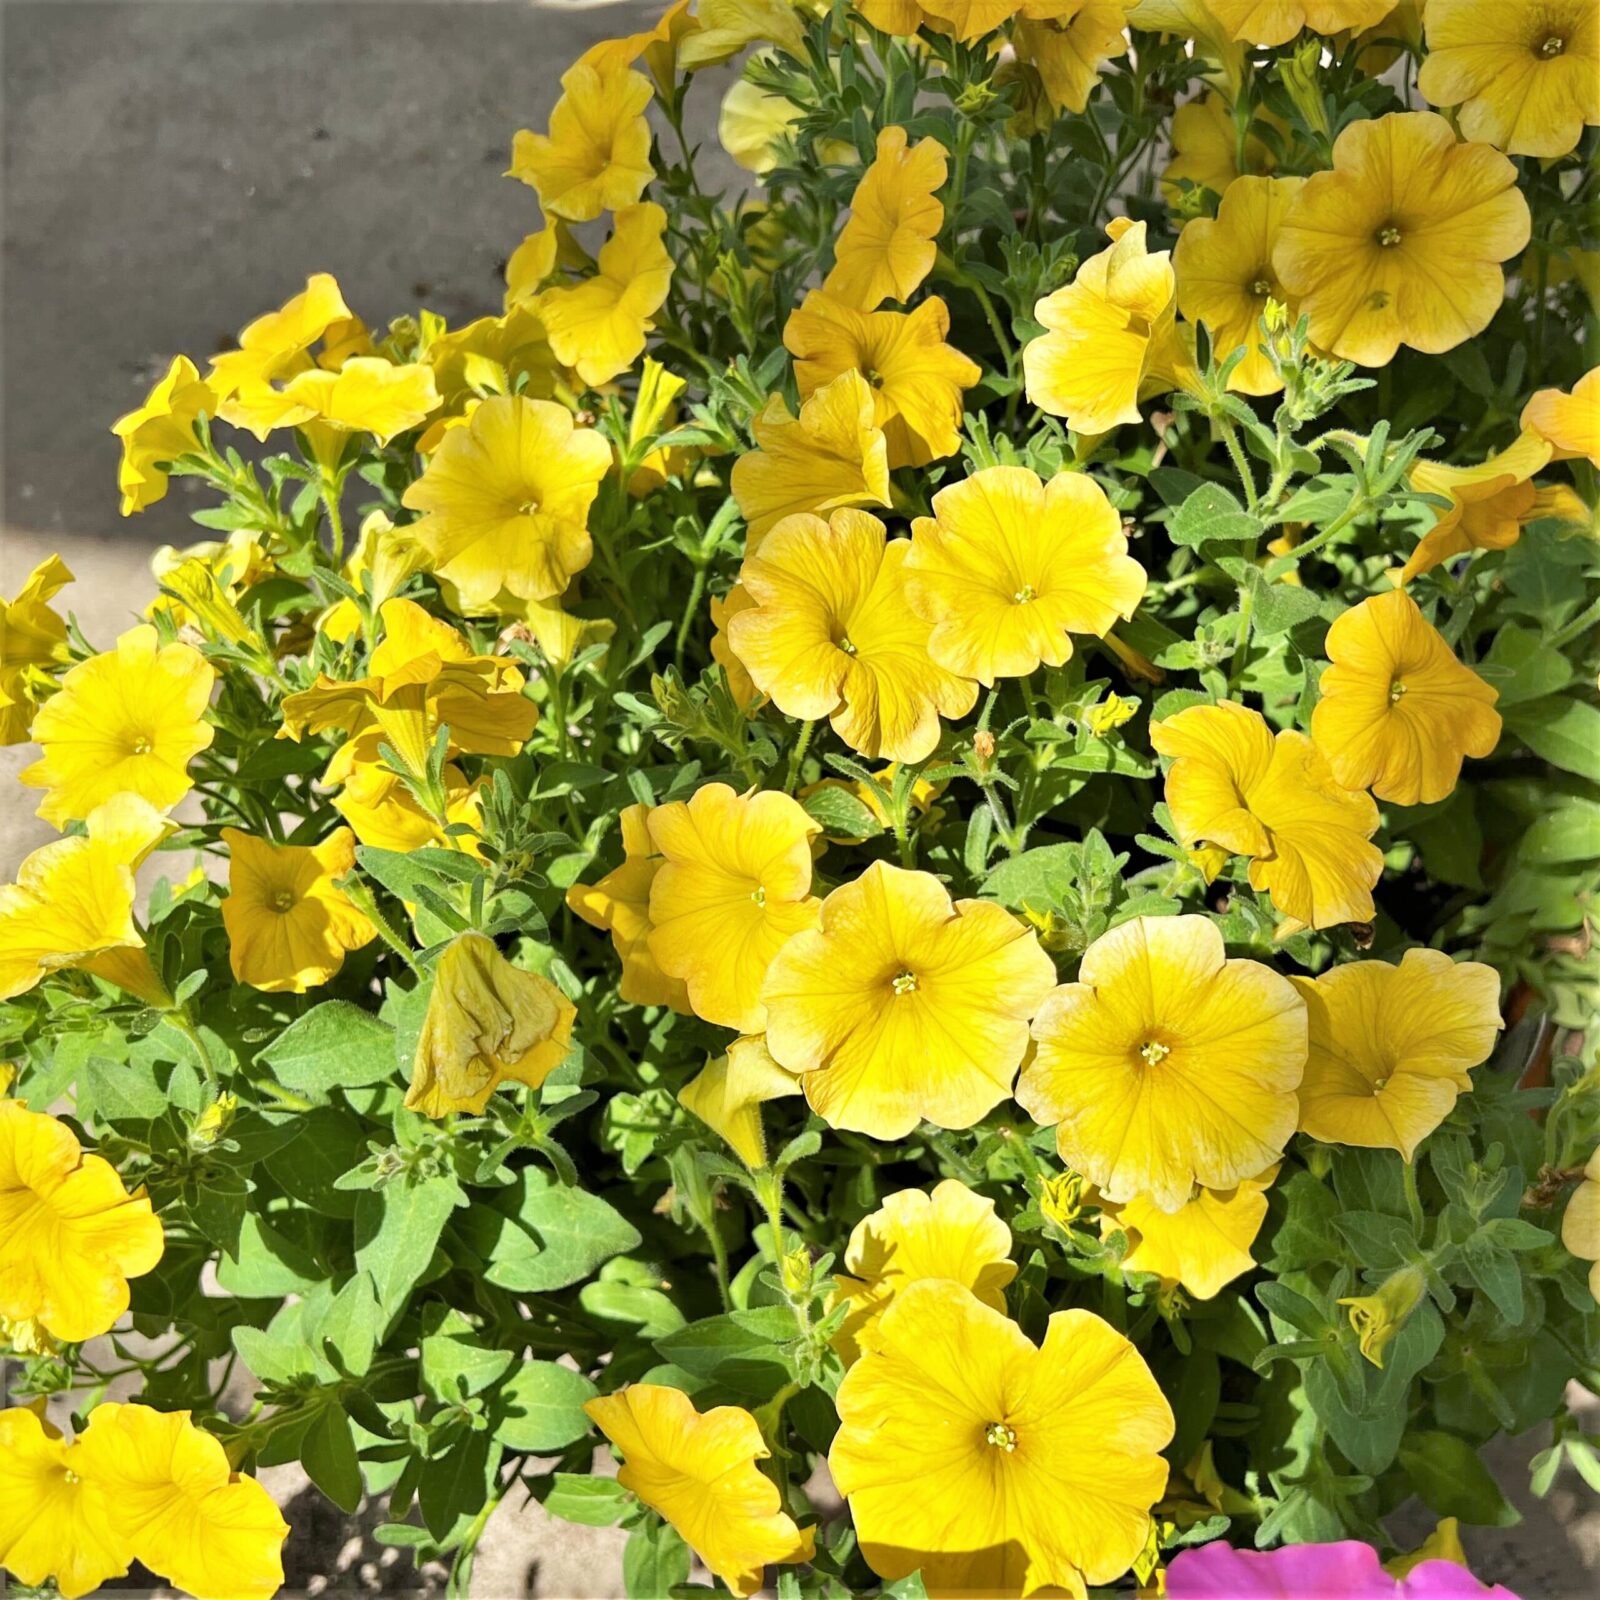 Greenstreet Growers Wholesale Landscape Supply Finished Production Plants Annual Petunia Yellow